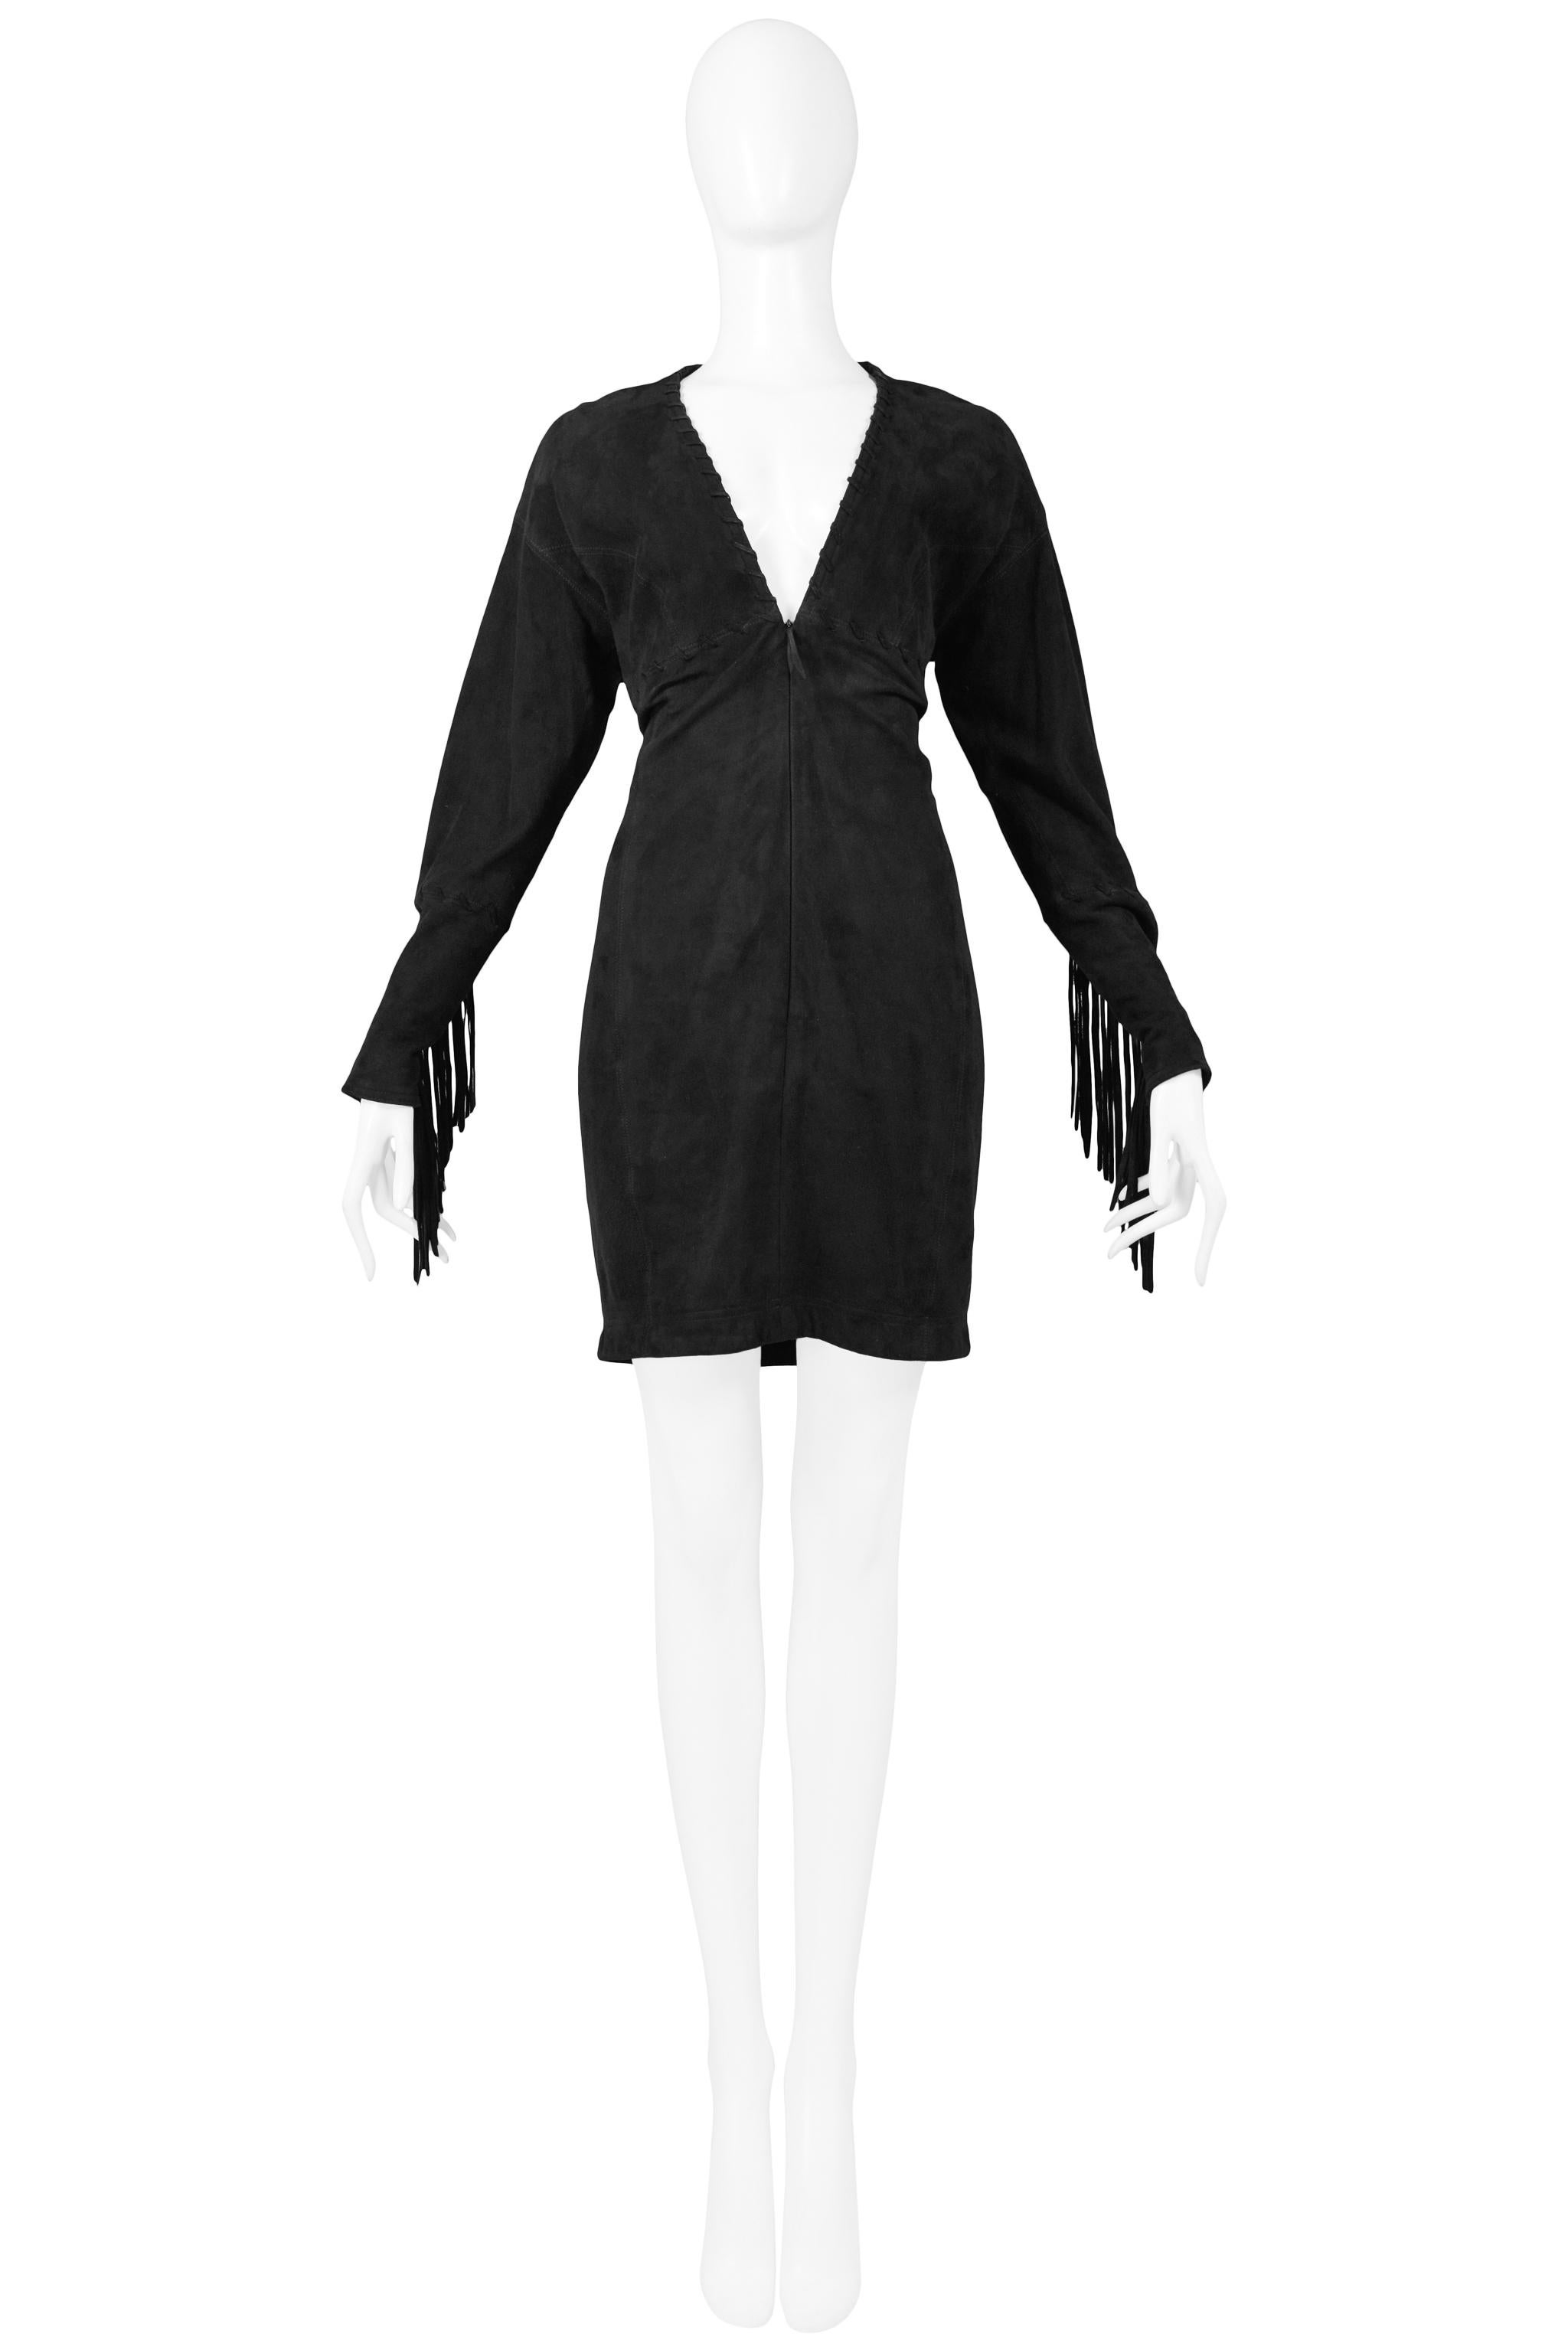 Resurrection is excited to offer this vintage Isaac Mizrahi black suede long sleeve mini dress featuring a deep v neckline, whipstitching, and a front zipper enclosure. Fringe detail along the bottom of the sleeve. 100% leather/lamb suede. 1989